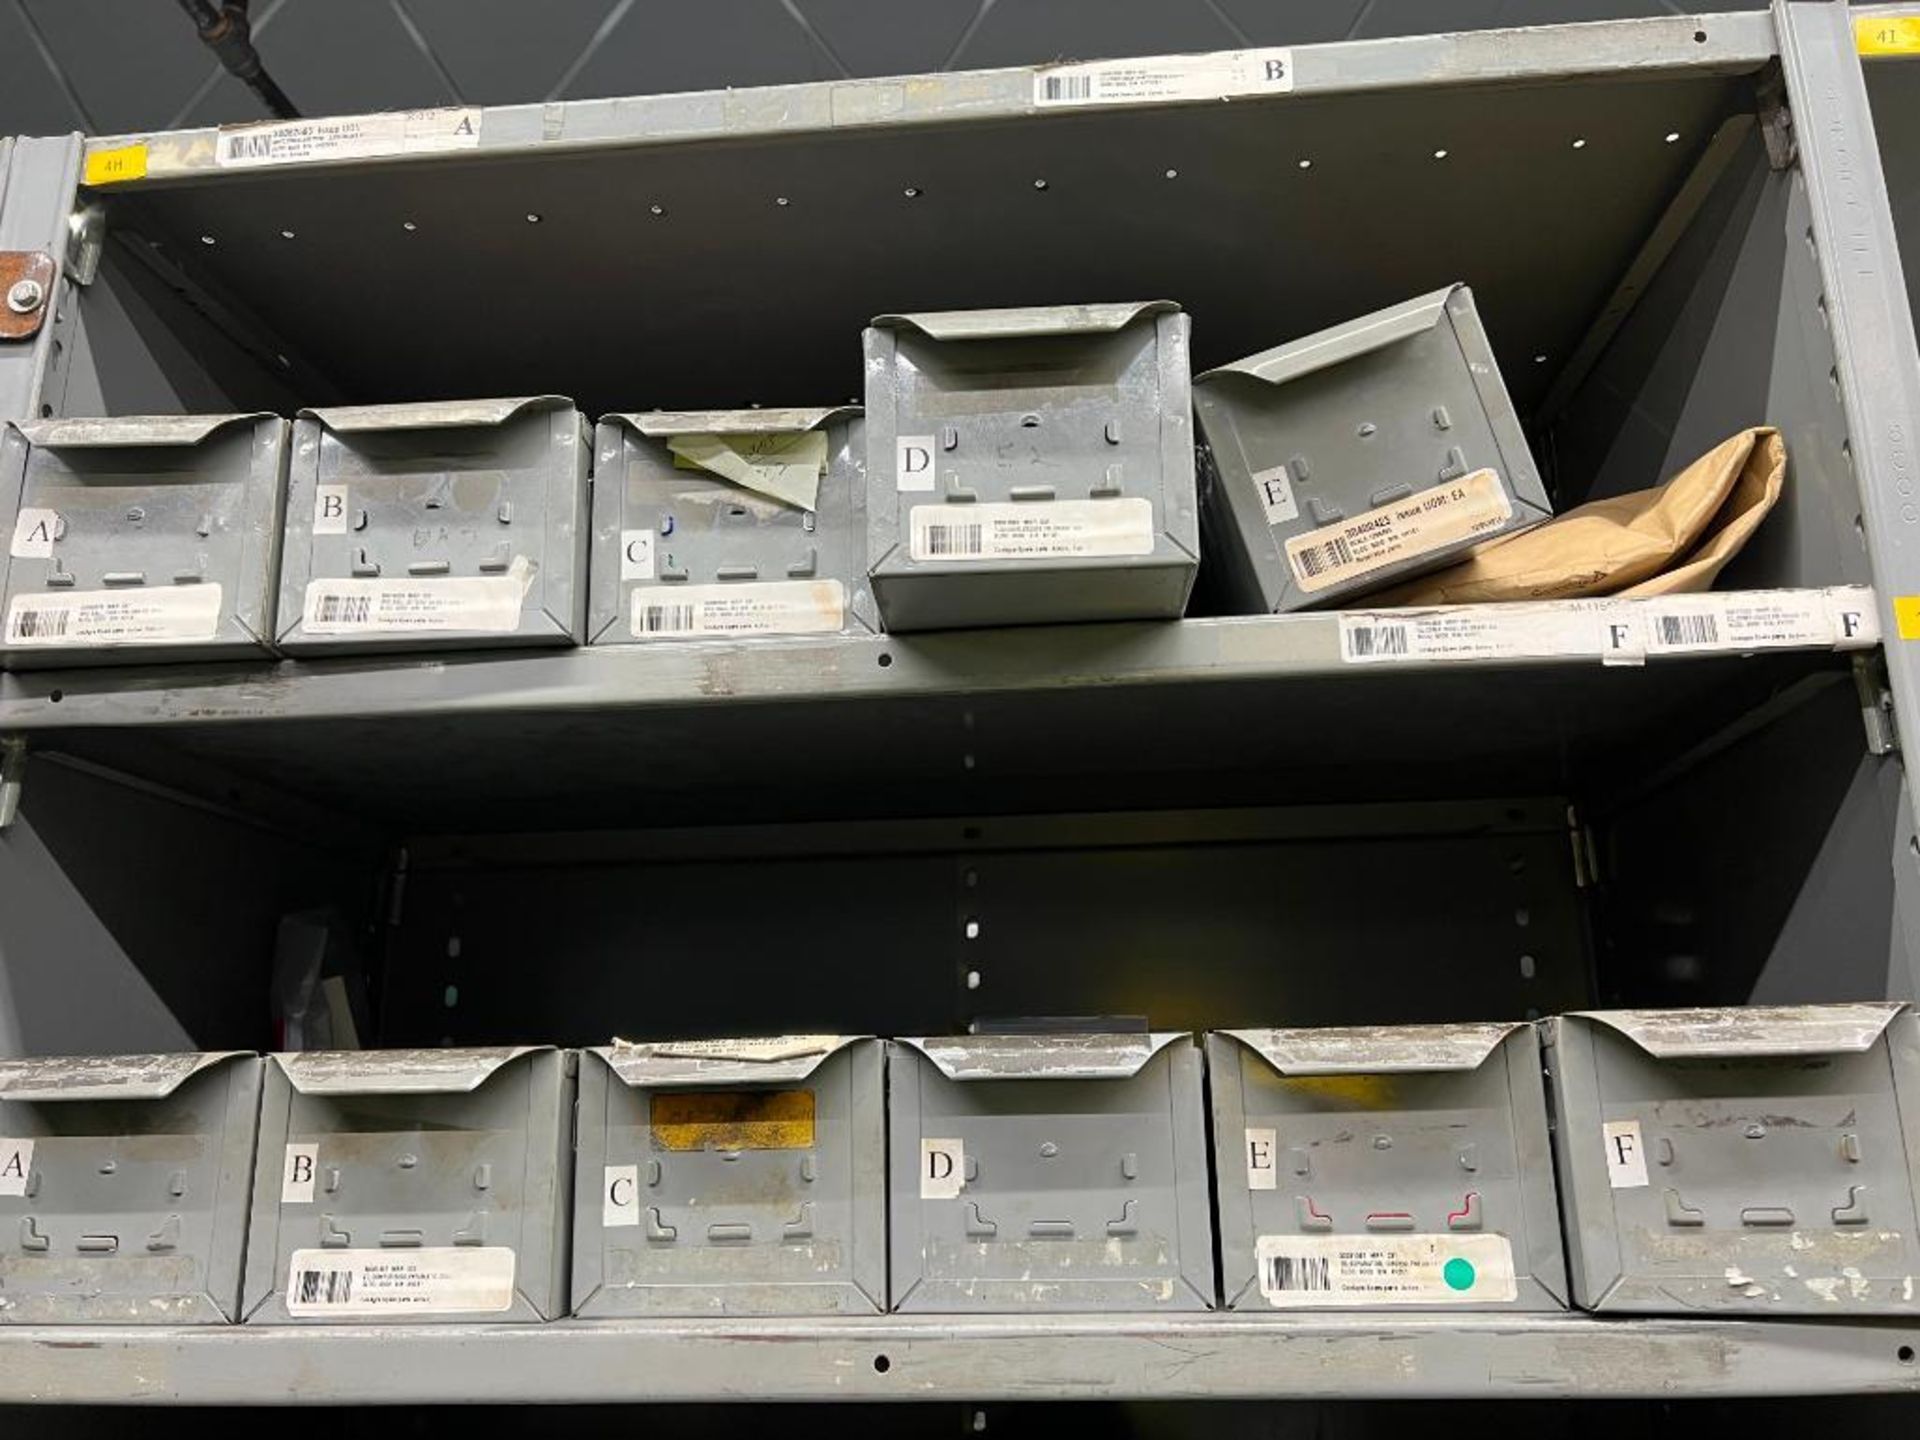 contents of gray shelving units to include, bearings, shafts, filters, fuses, pneumatic scale parts, - Image 12 of 141